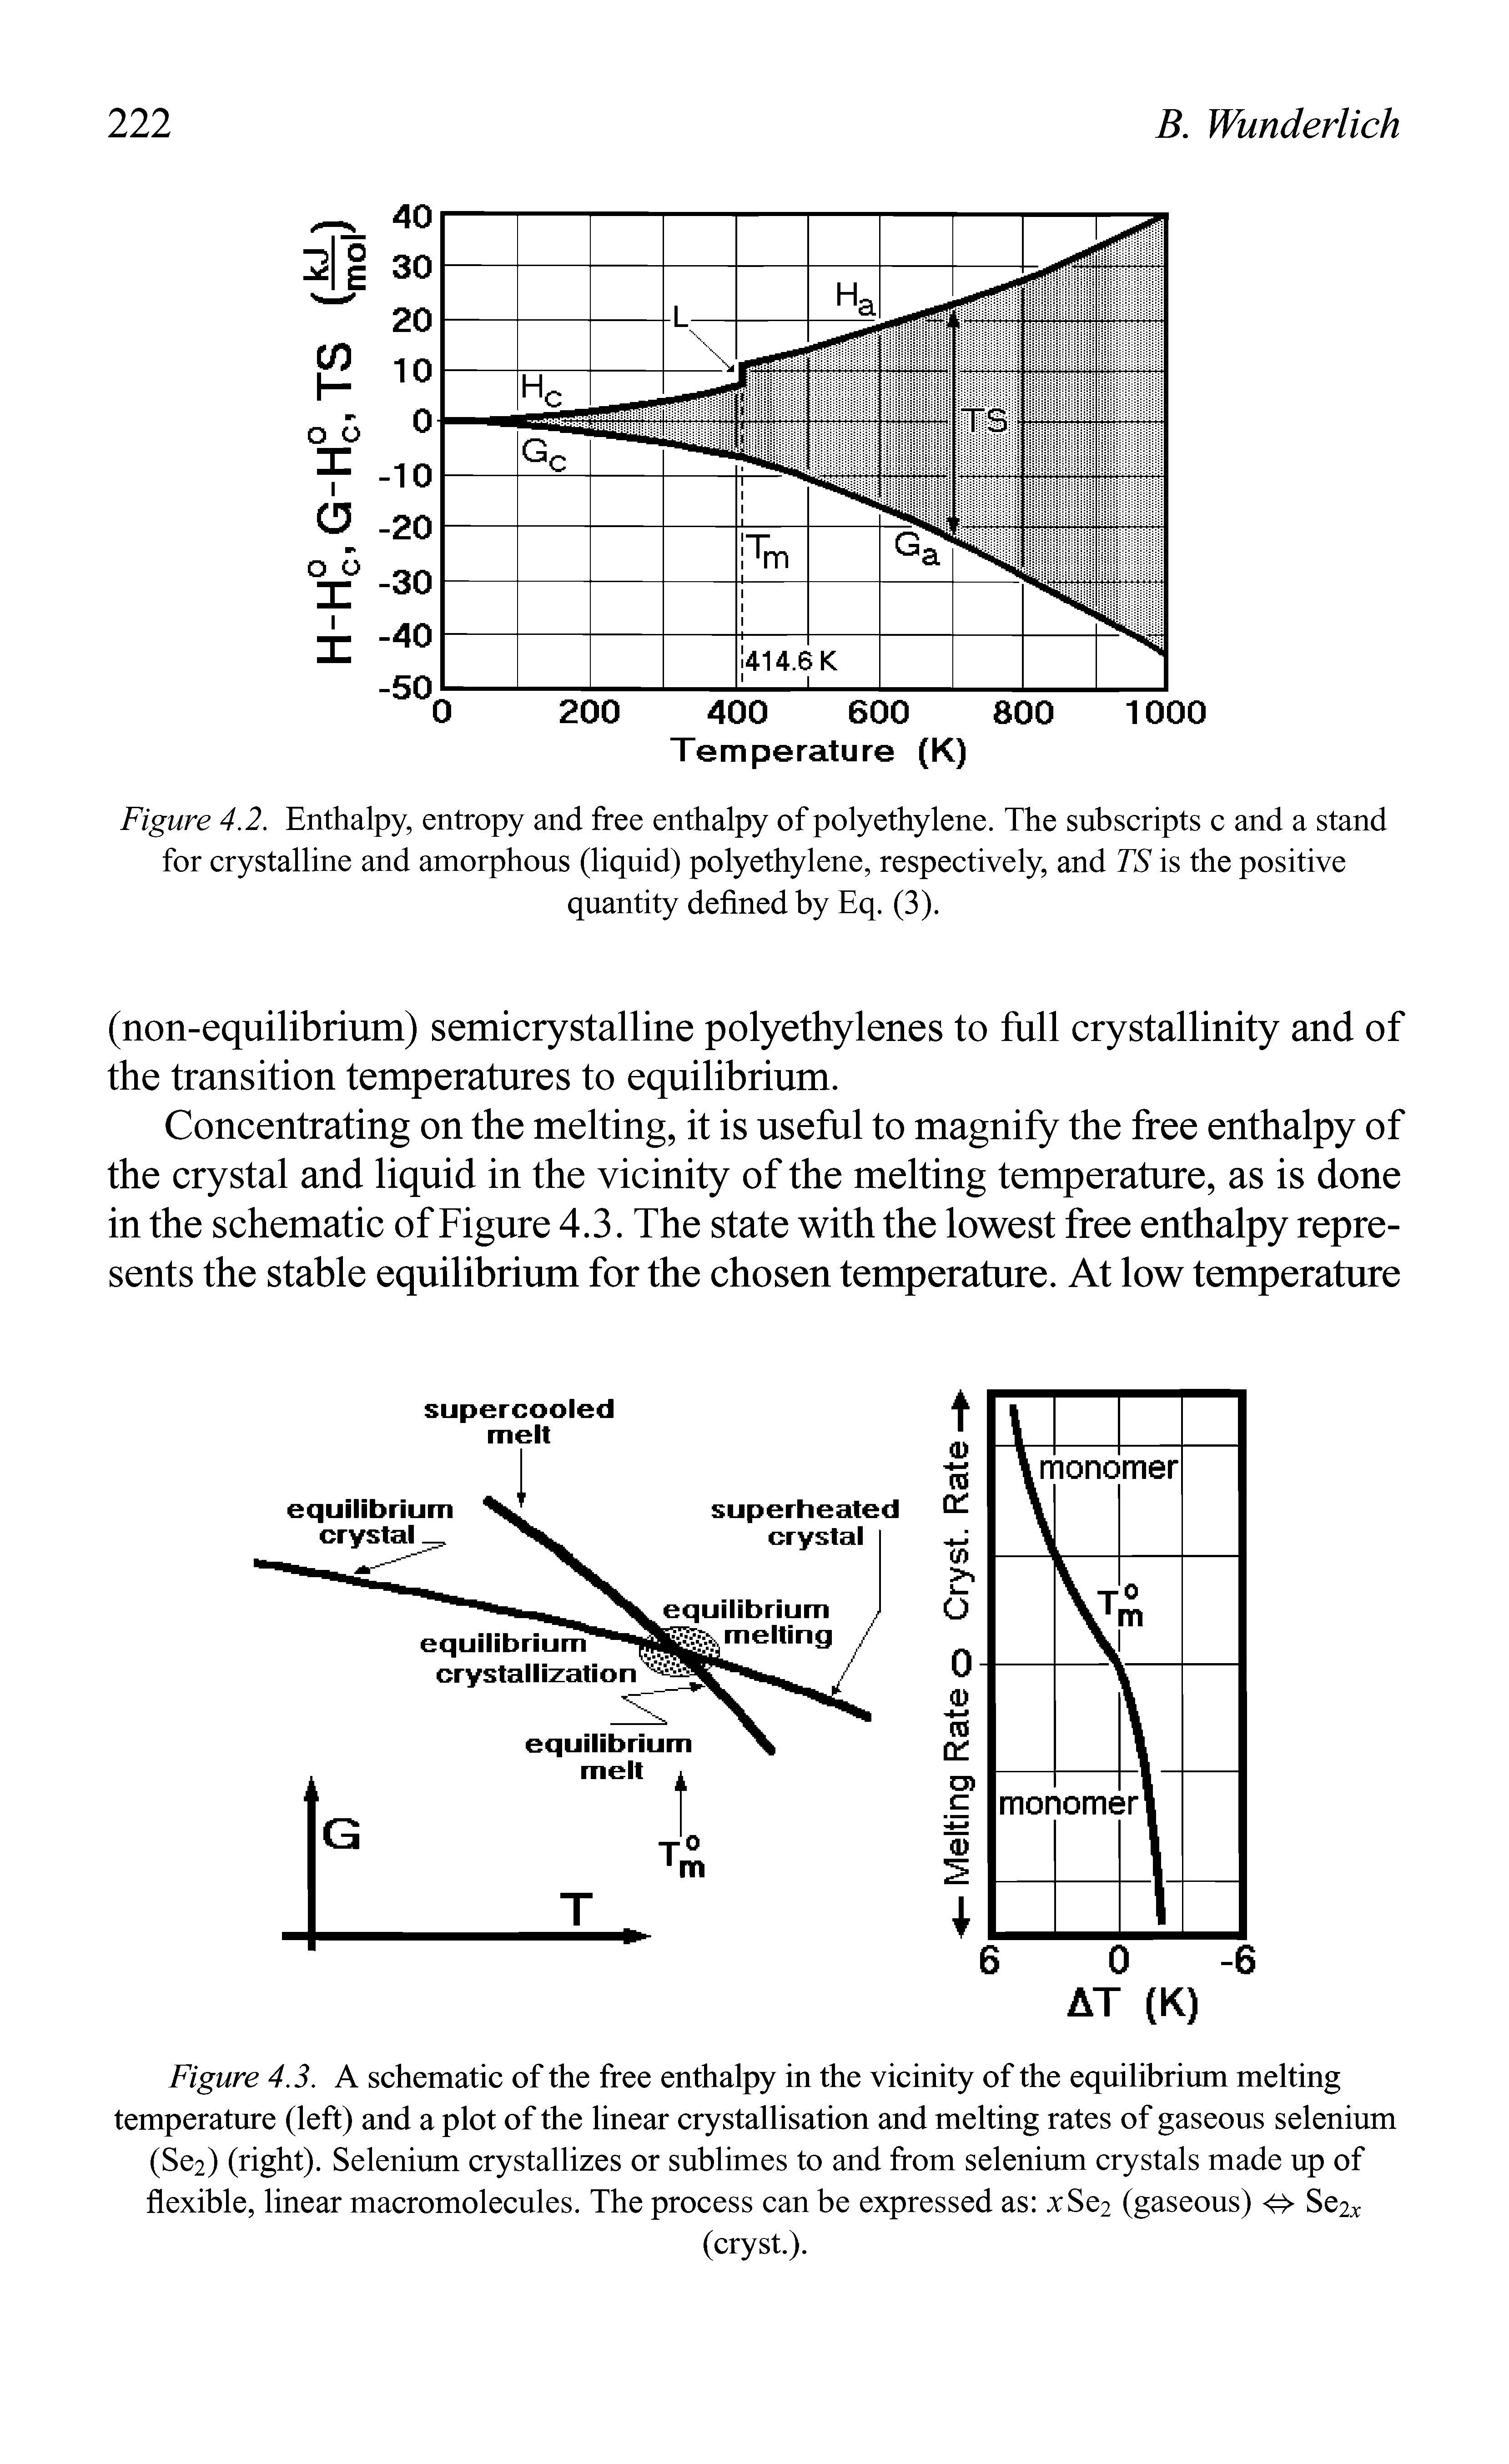 Figure 4.3. A schematic of the free enthalpy in the vicinity of the equilibrium melting temperature (left) and a plot of the linear crystallisation and melting rates of gaseous selenium (Sc2) (right). Selenium crystallizes or sublimes to and from selenium crystals made up of flexible, linear macromolecules. The process can be expressed as xSc2 (gaseous) Se2x...